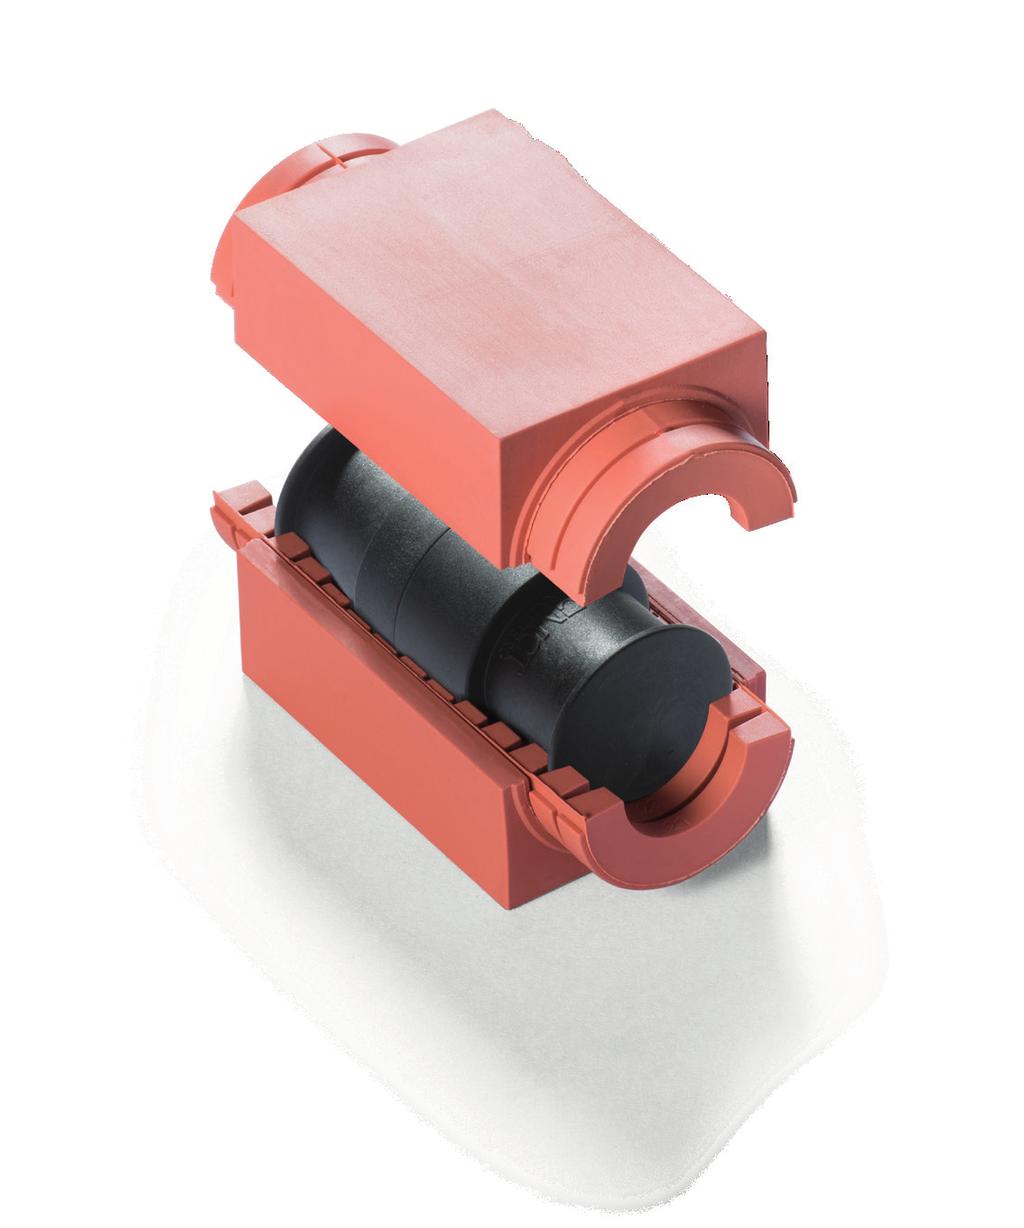 HandiPlug s low weight and smart design, together with HandiBlock, create a secure pressure-tight unit.